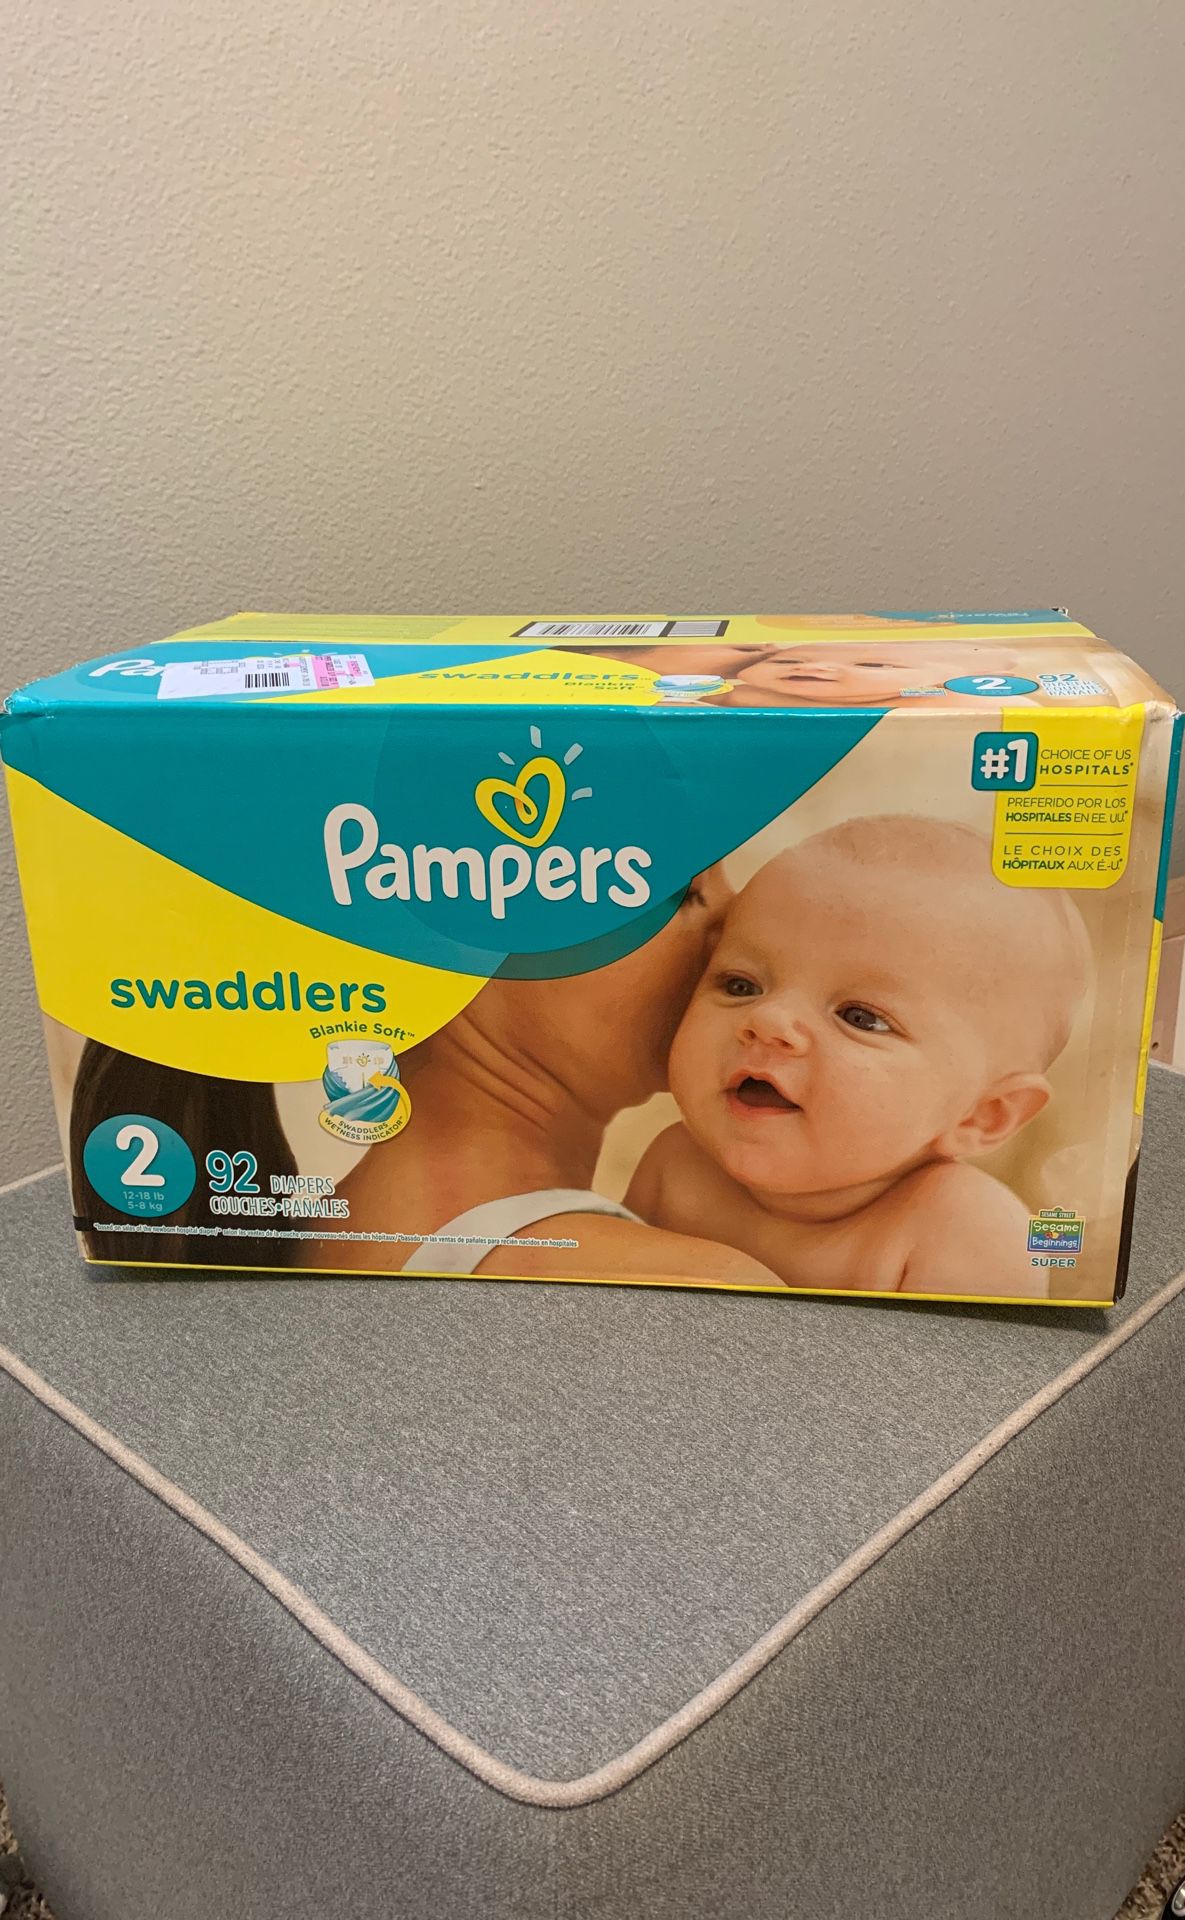 Pampers Swaddlers size 2